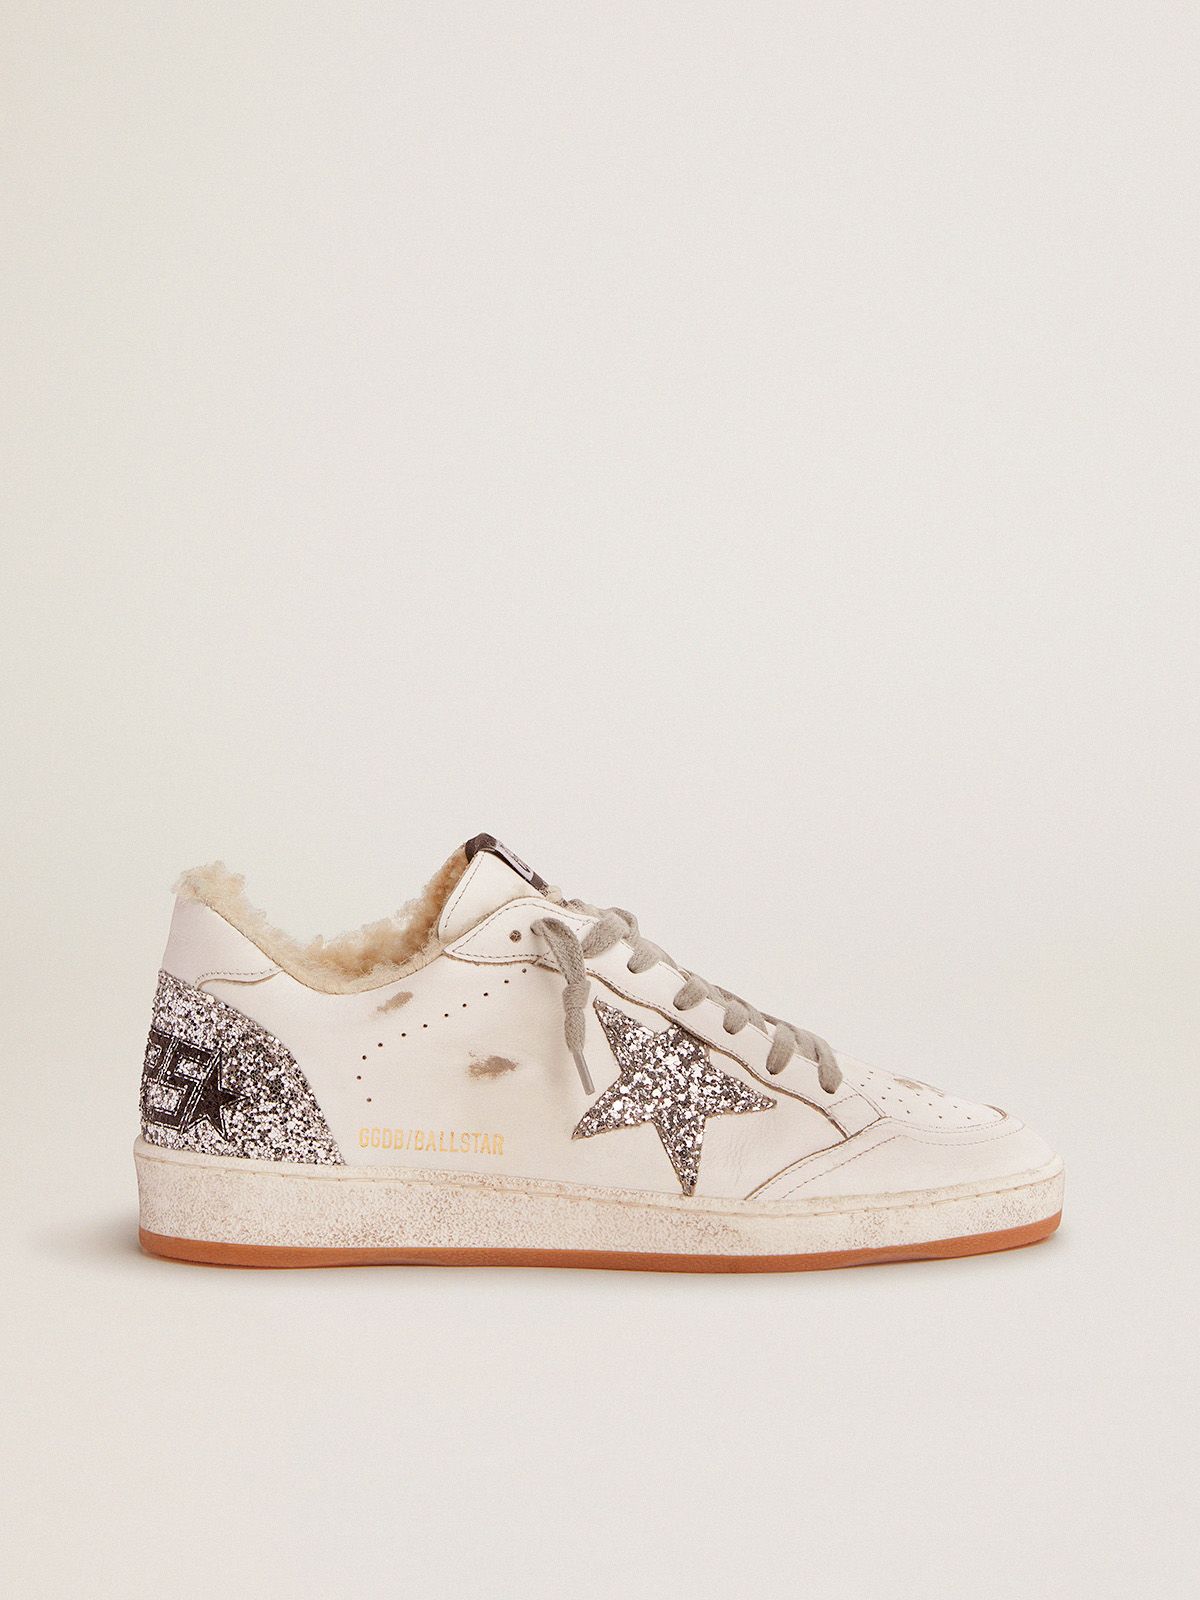 Golden Goose Sneakers Donna Ball Star sneakers in white leather with silver glitter details and shearling lining